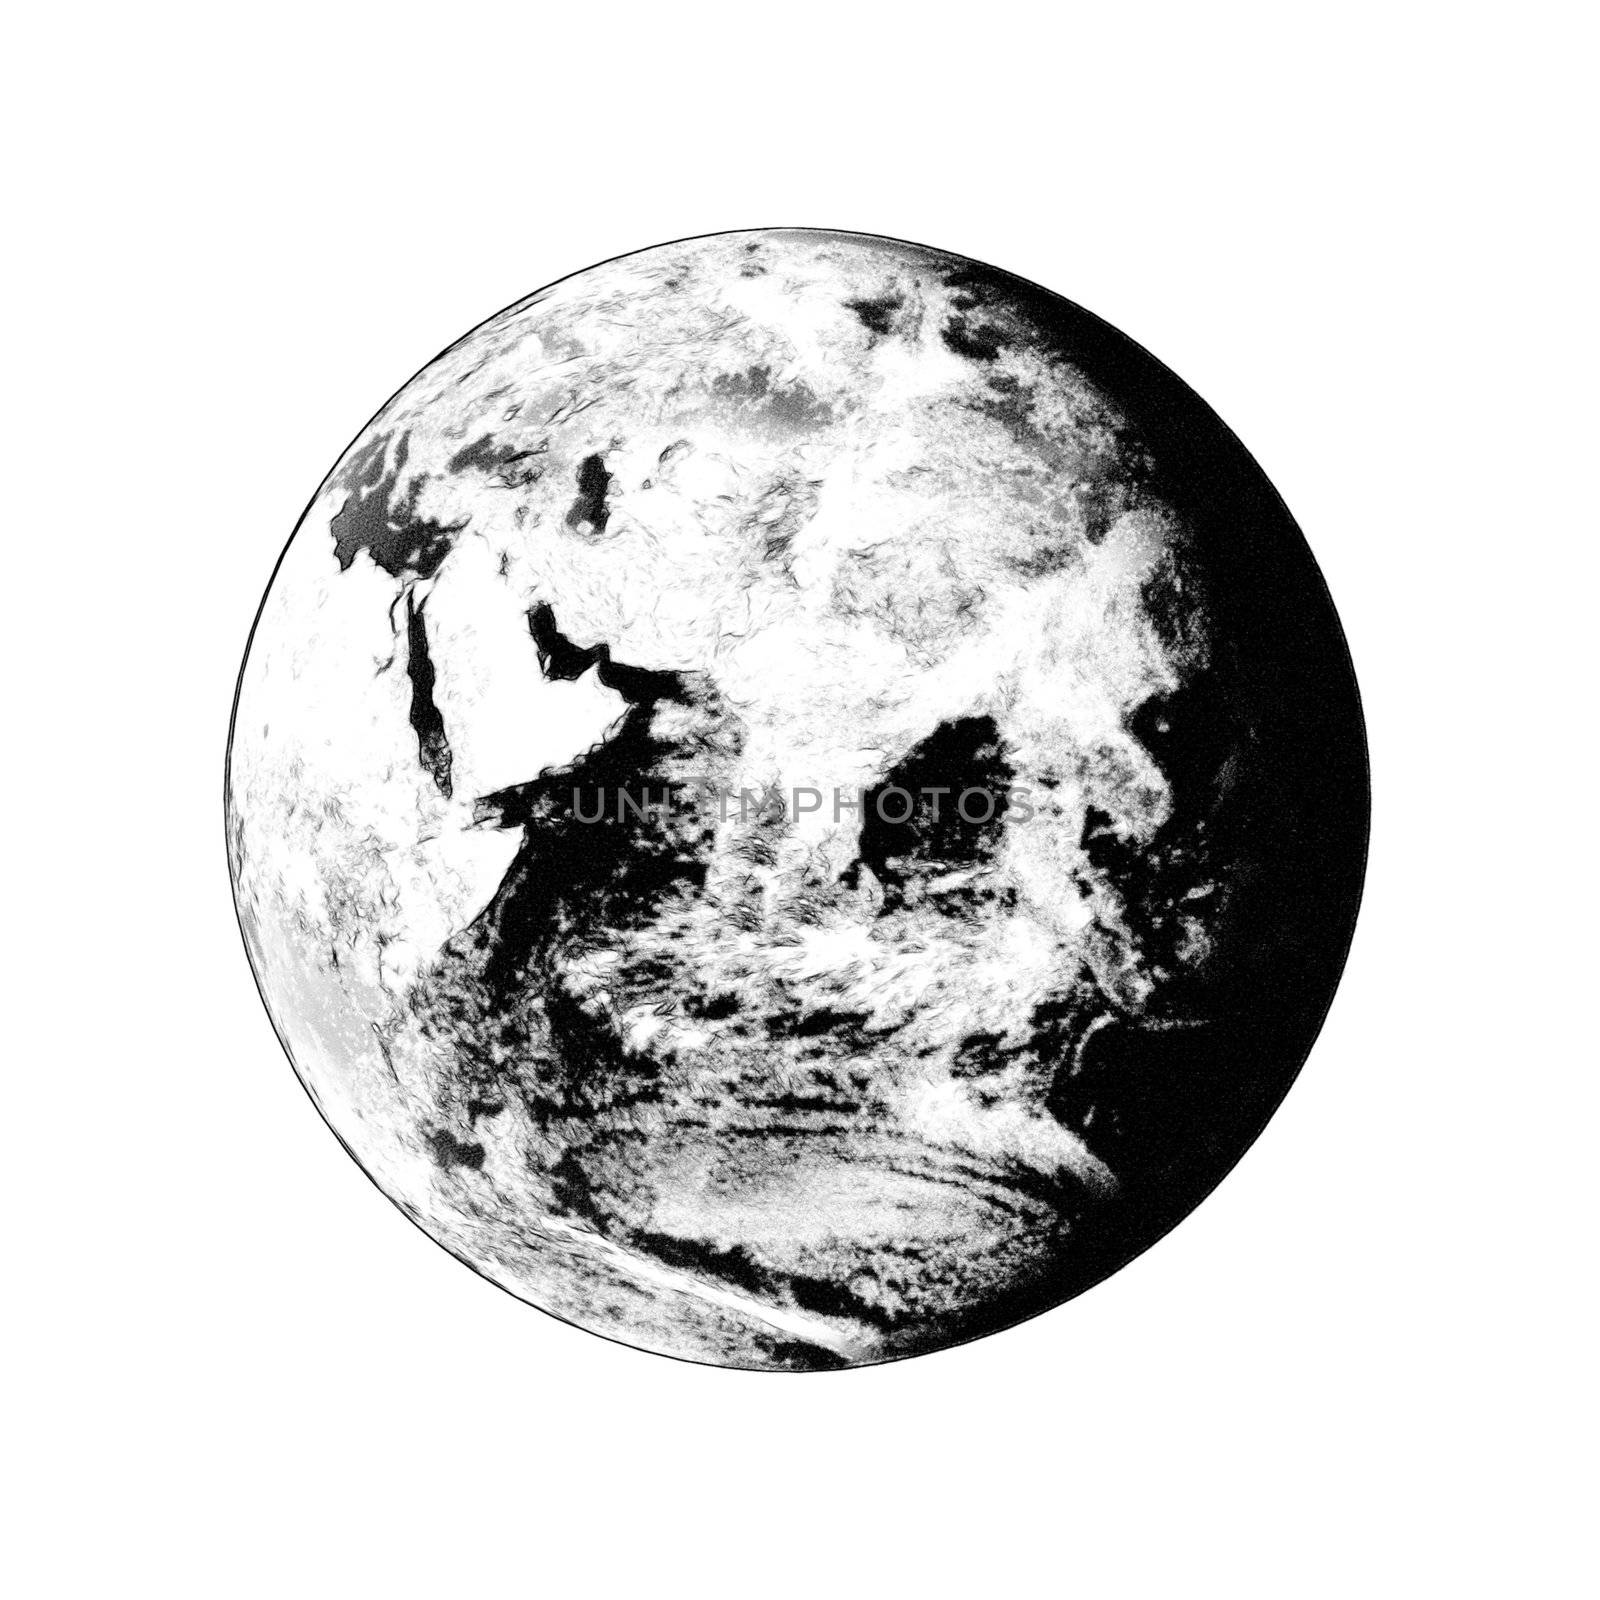 Earth globe showing on white background clouds visible. Some components of this image are provided courtesy of NASA, and have been found at visibleearth.nasa.gov